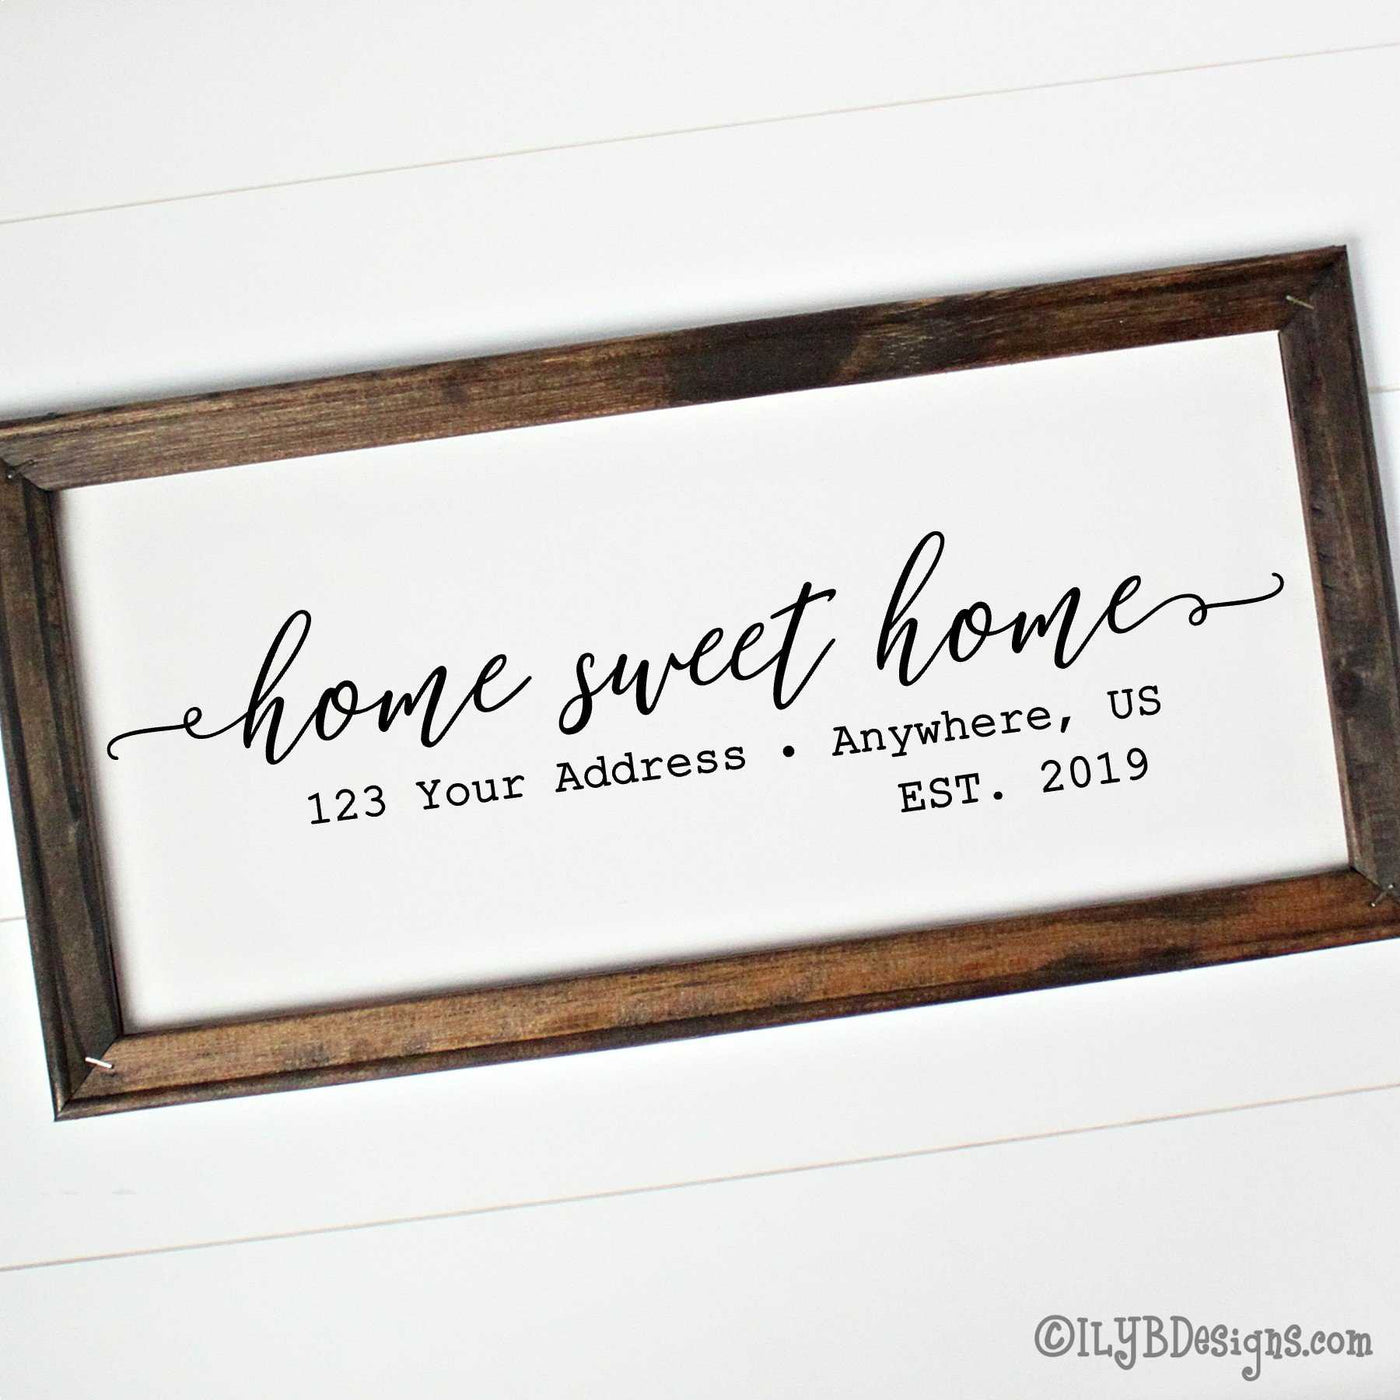 Home sweet home written in black script with an optional address and established year below. Design is on a white canvas framed with a dark walnut stain frame. The frame measures 20"x10" and design is placed horizontally.